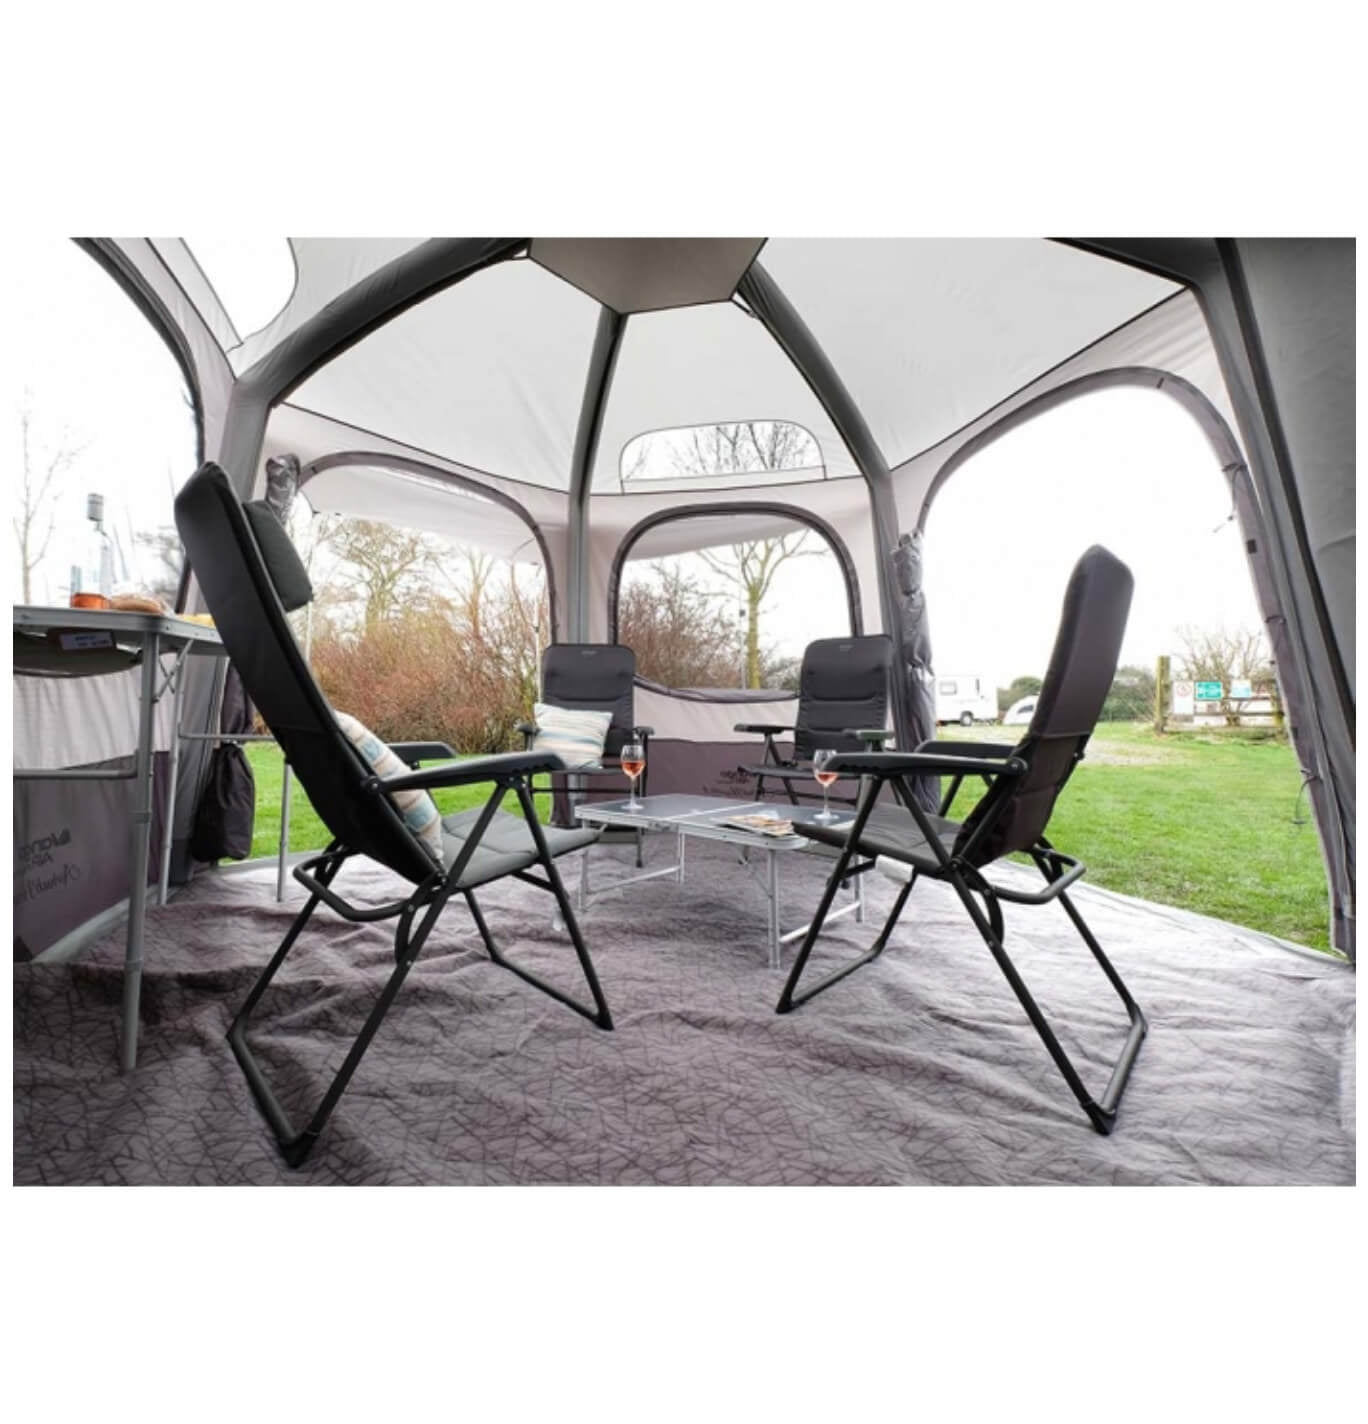 Table and chairs set up in the vango airhub hexaway drive away awning